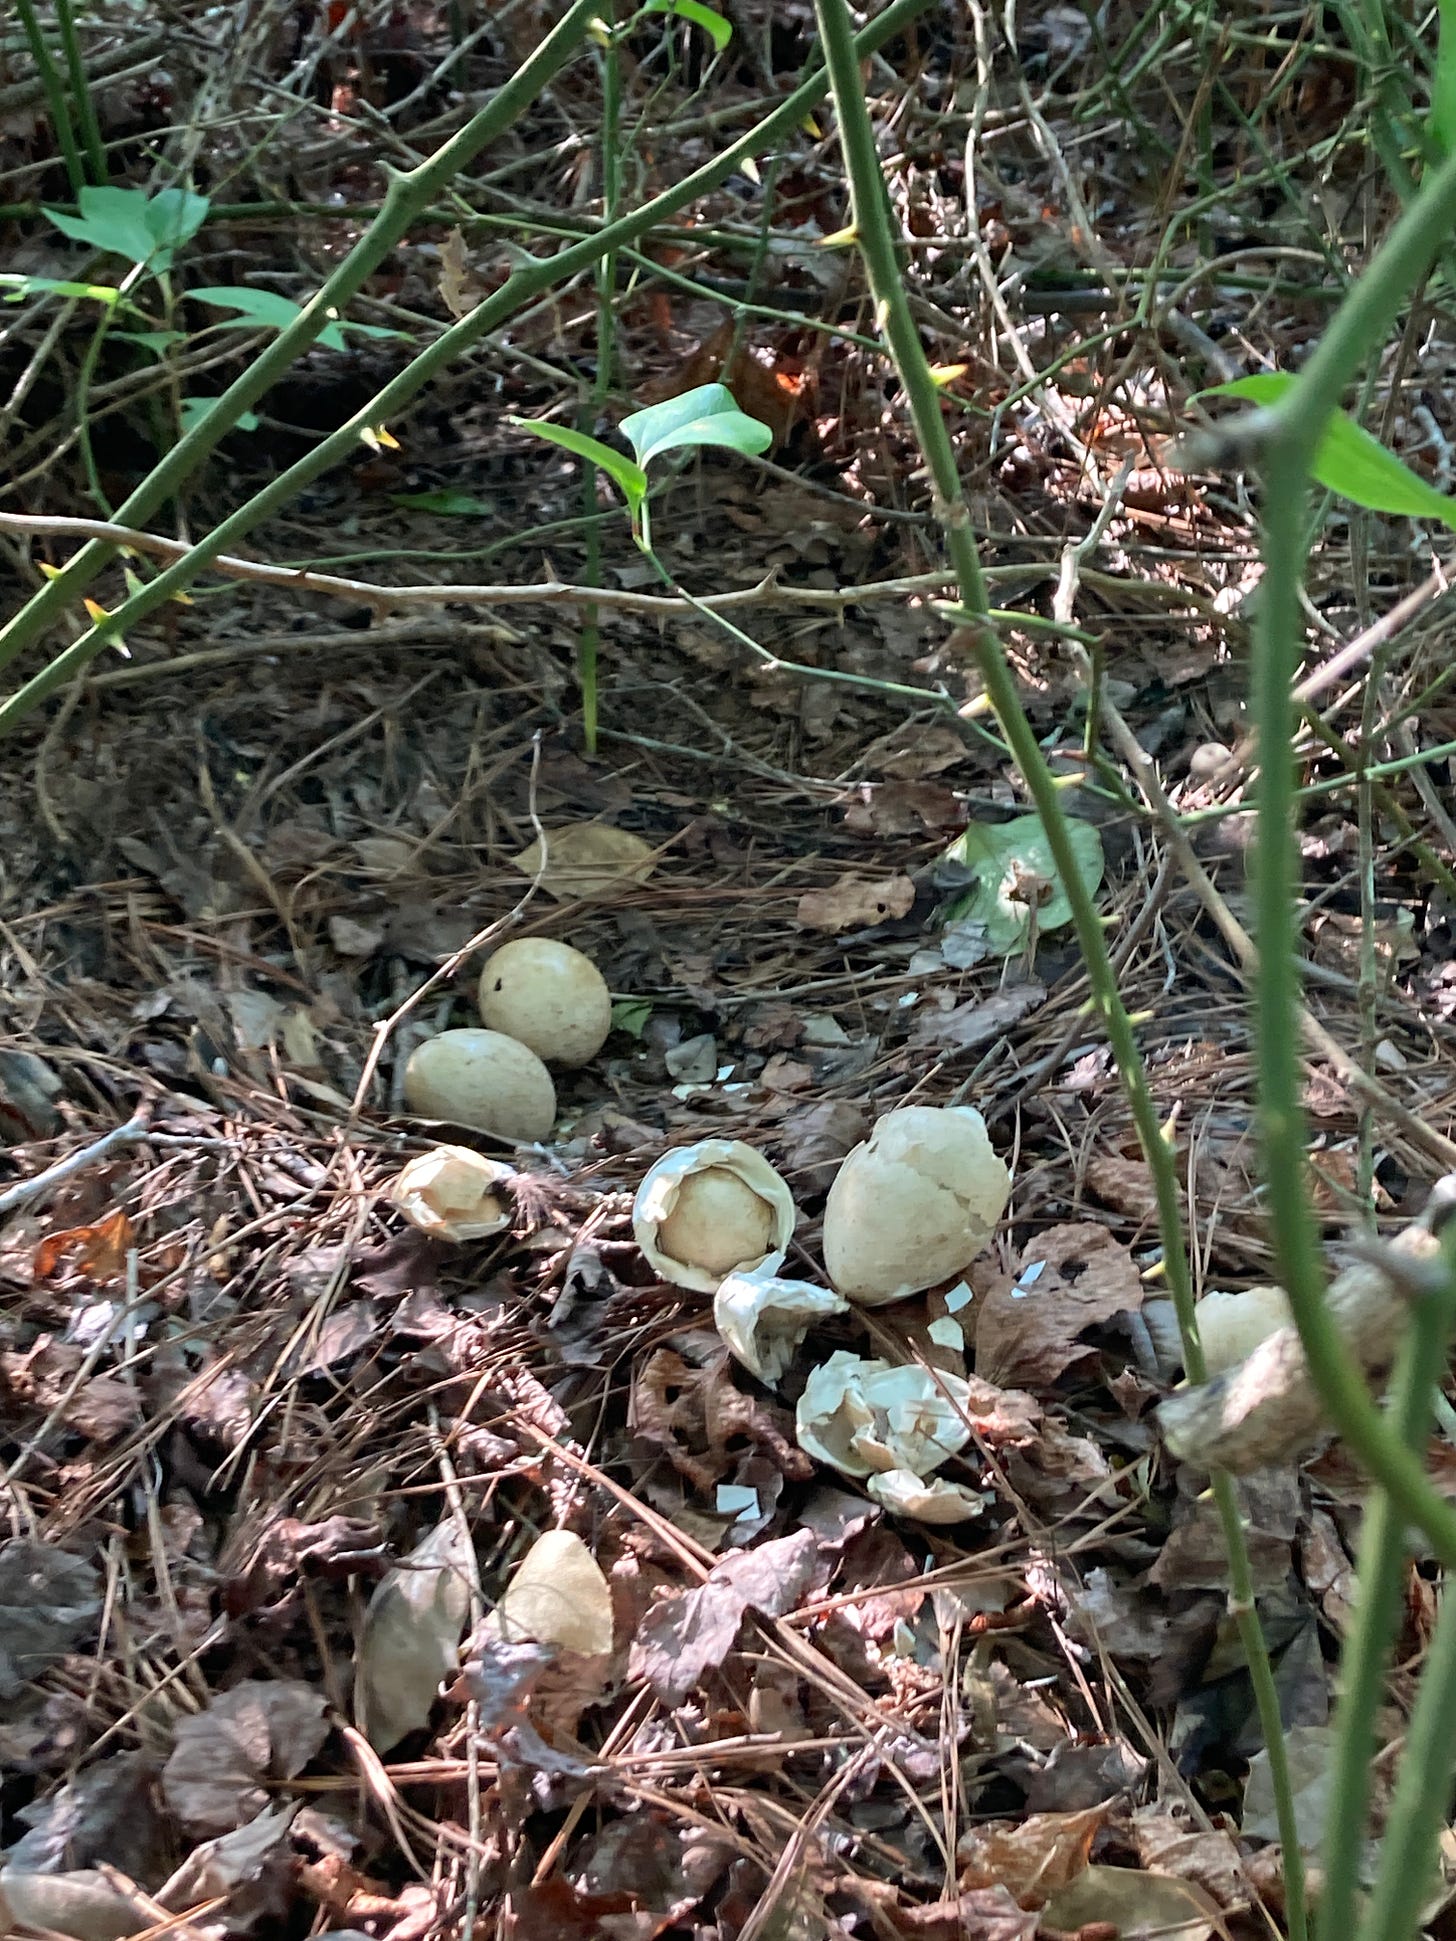 A turkey nest surrounded by greenbriar. In the foregrond, there are hatched, beige turkey eggs. In the background, two unhatched eggs sit side by side.